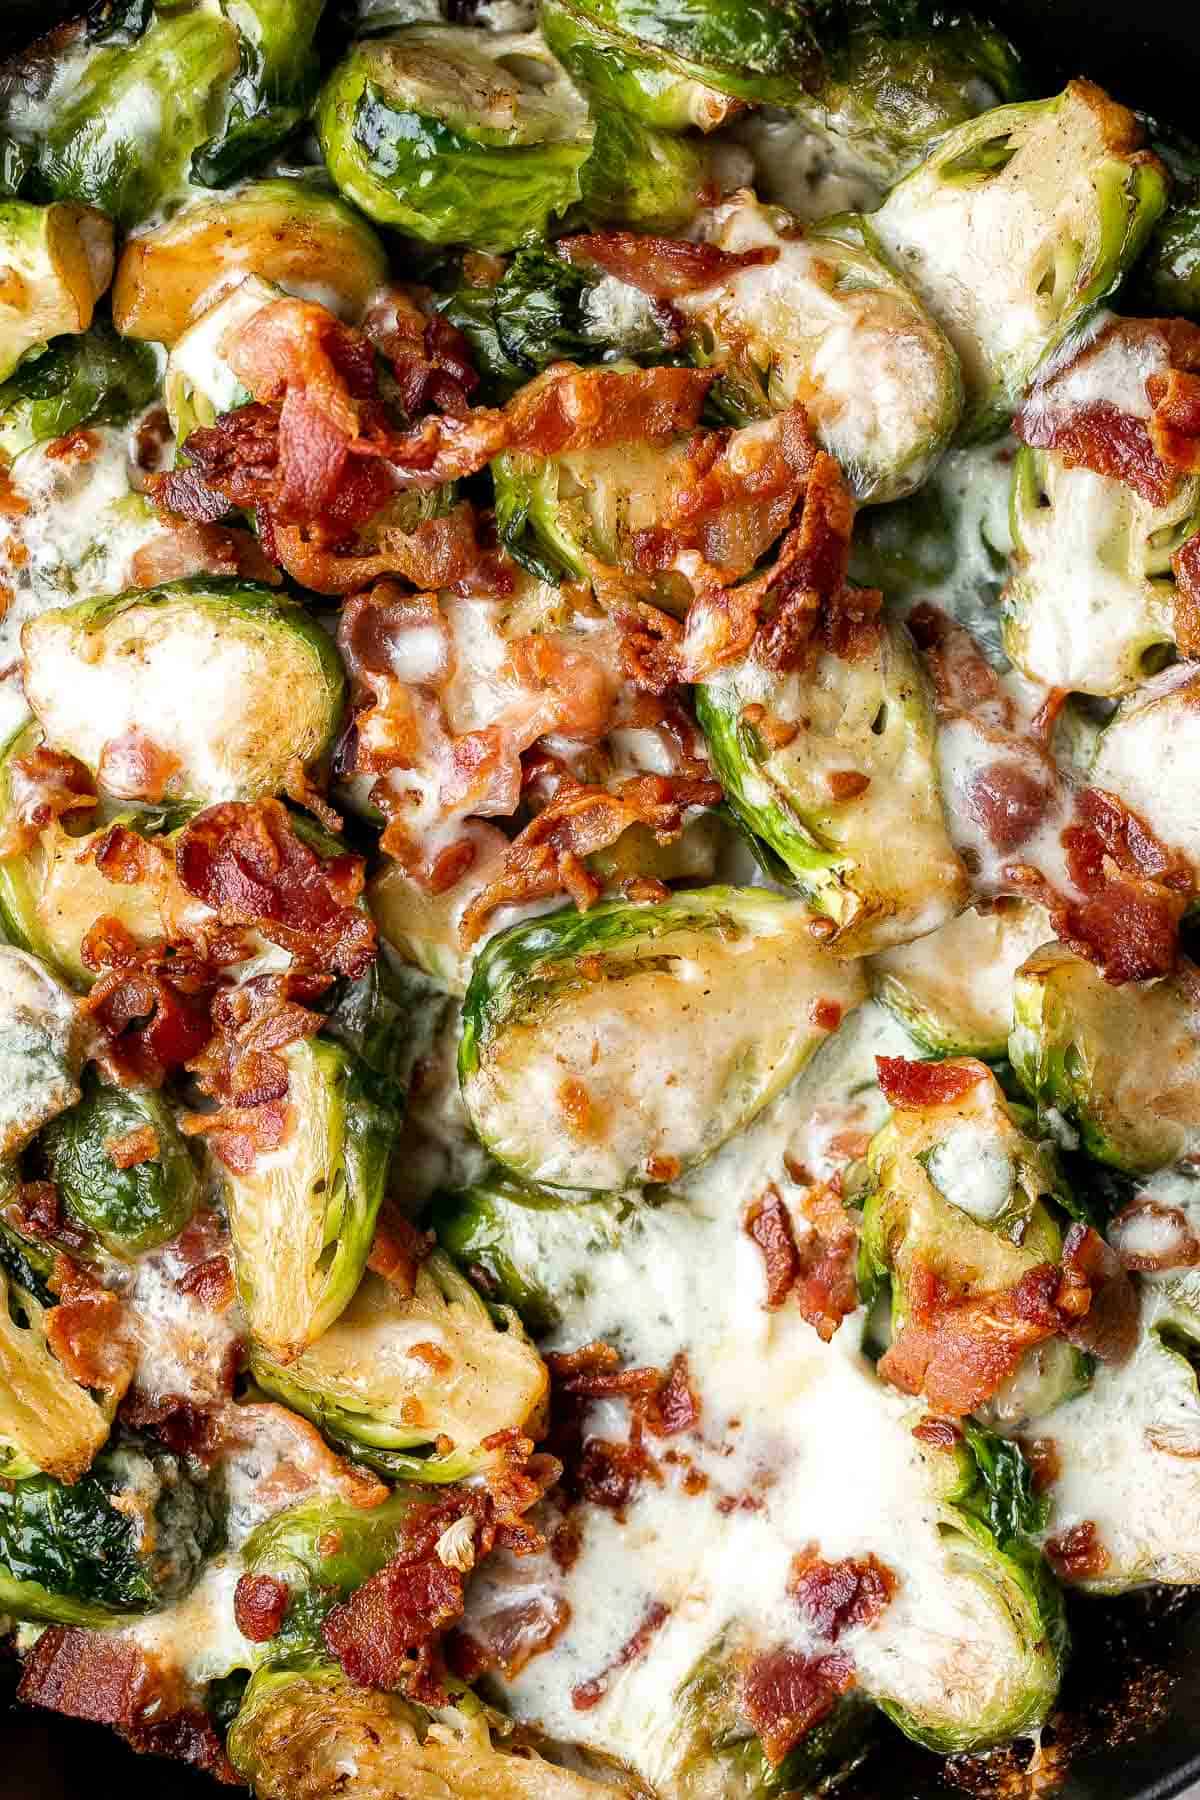 Cheesy Brussels Sprouts Bake is a comforting side dish made with sautéed garlic brussels sprouts, topped with bacon and cheese, and baked until bubbly. | aheadofthyme.com